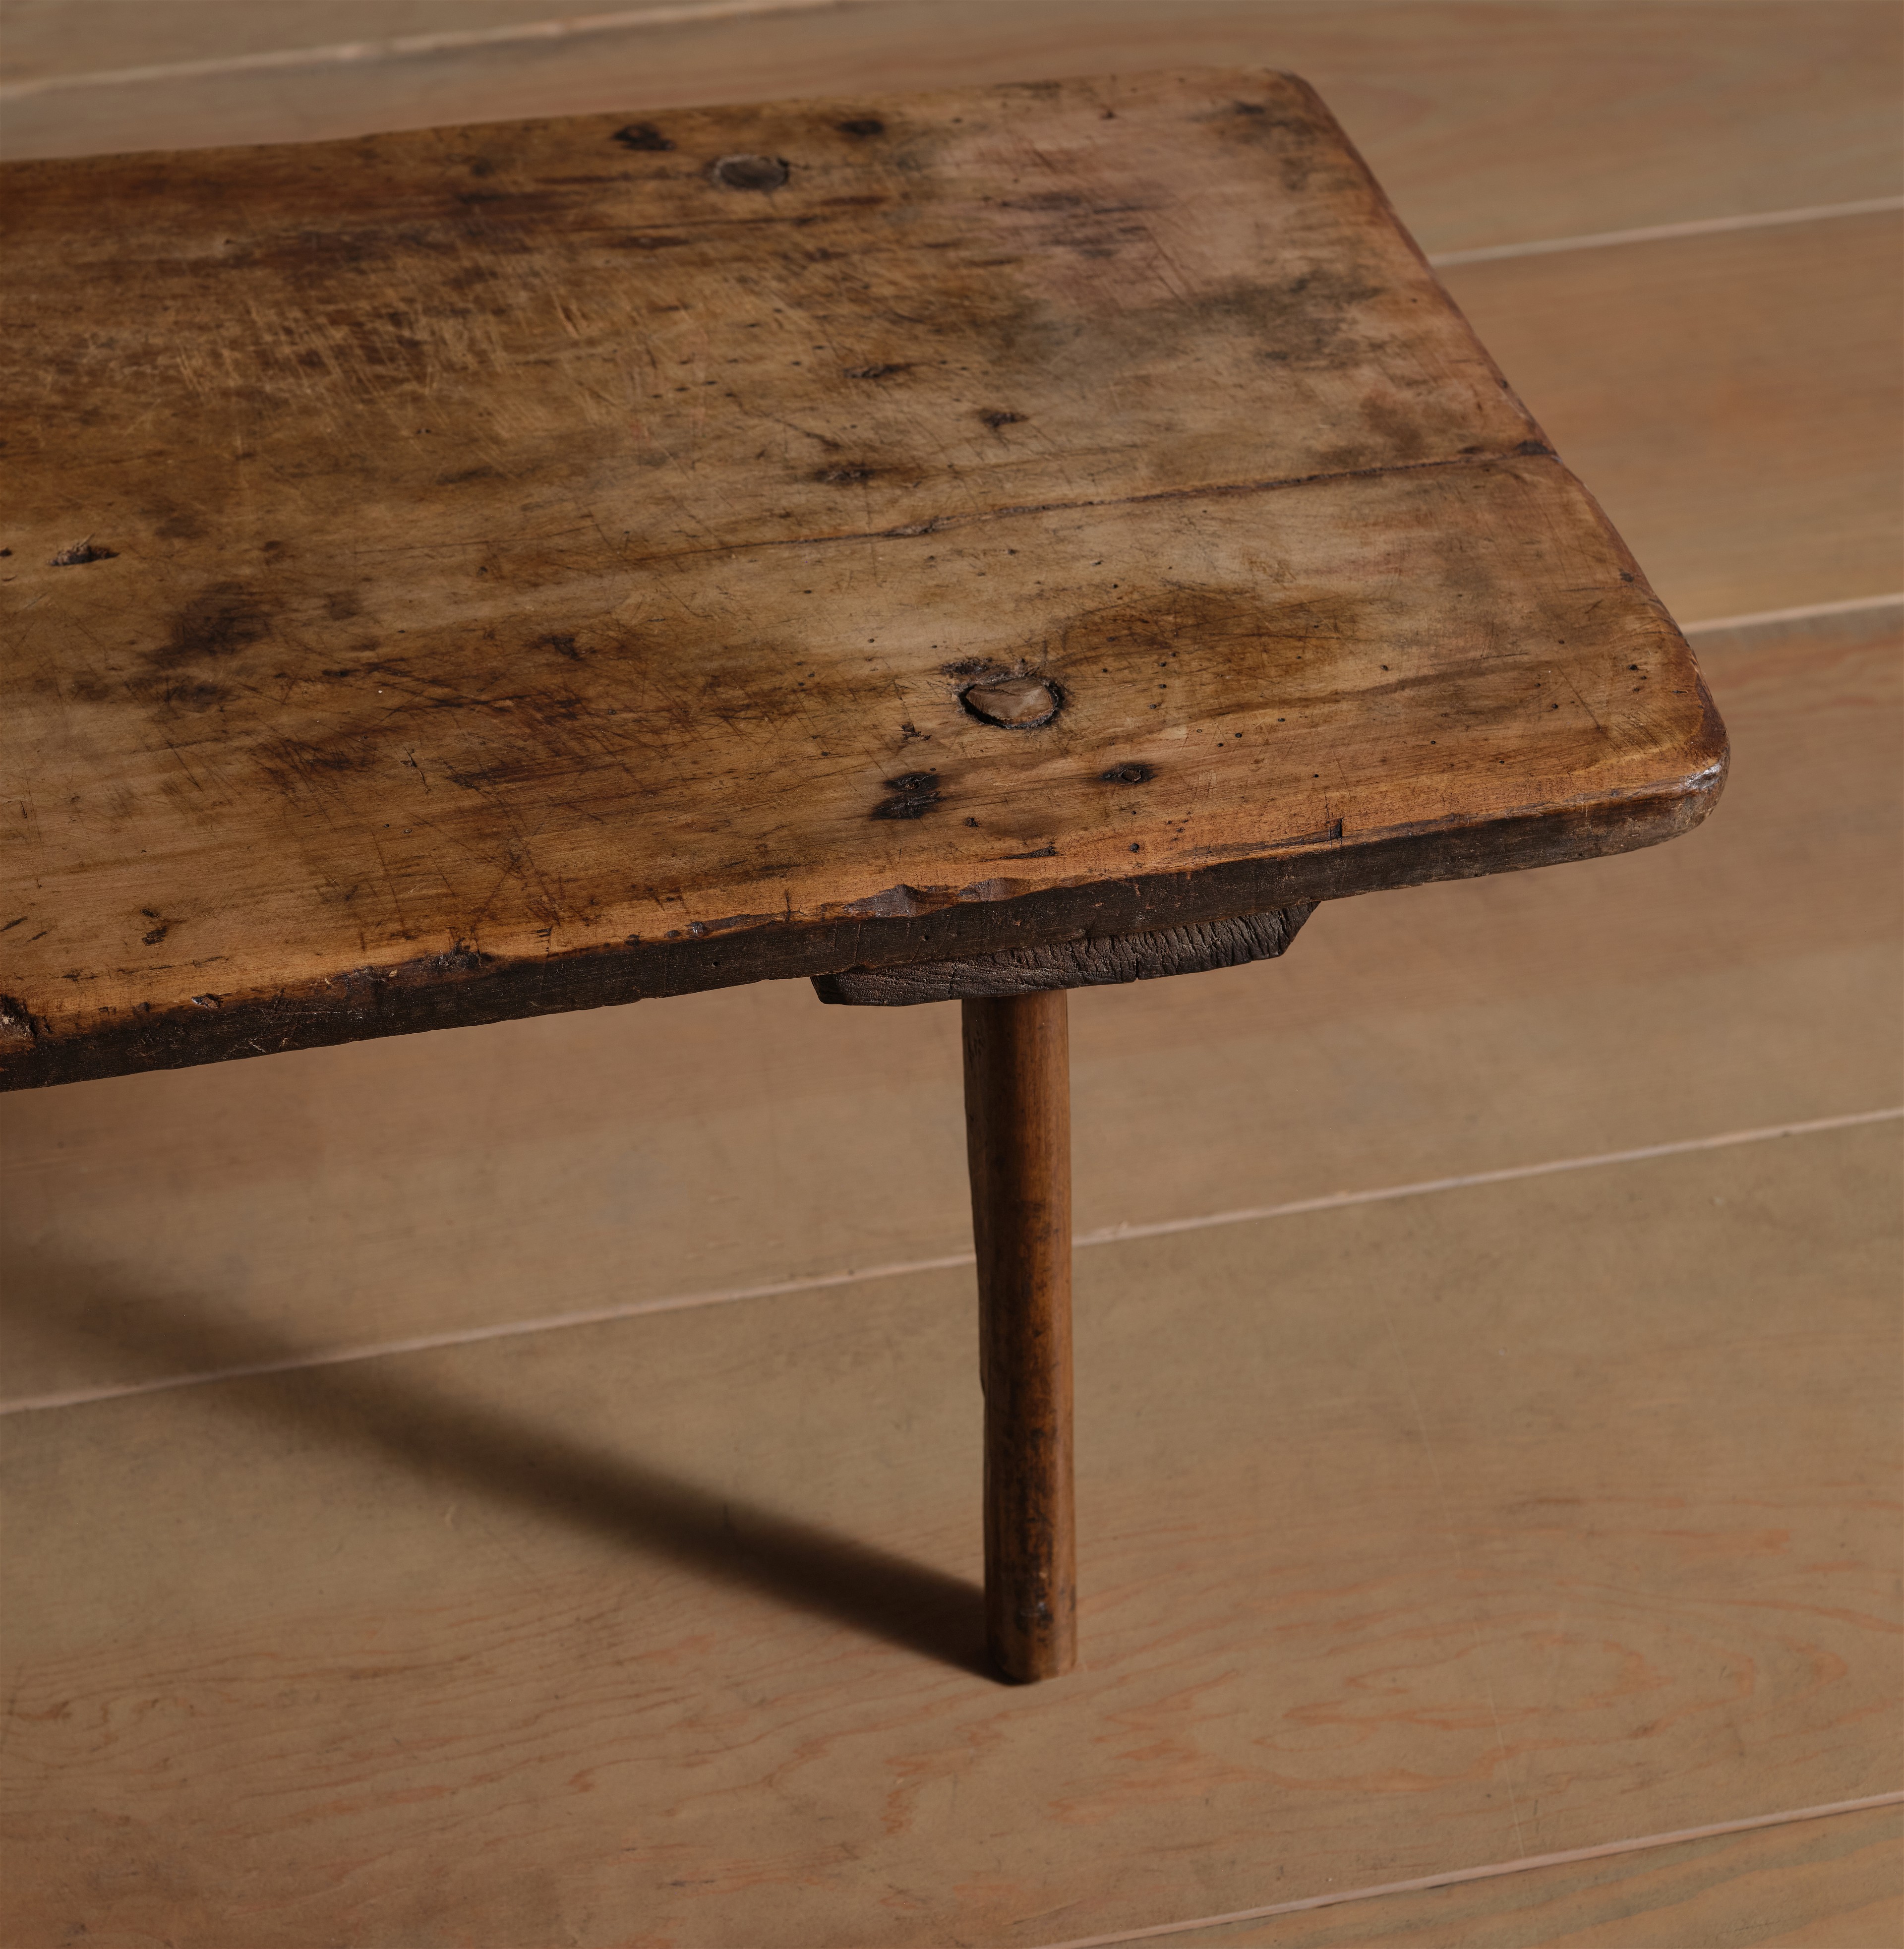 an old wooden table on a tile floor